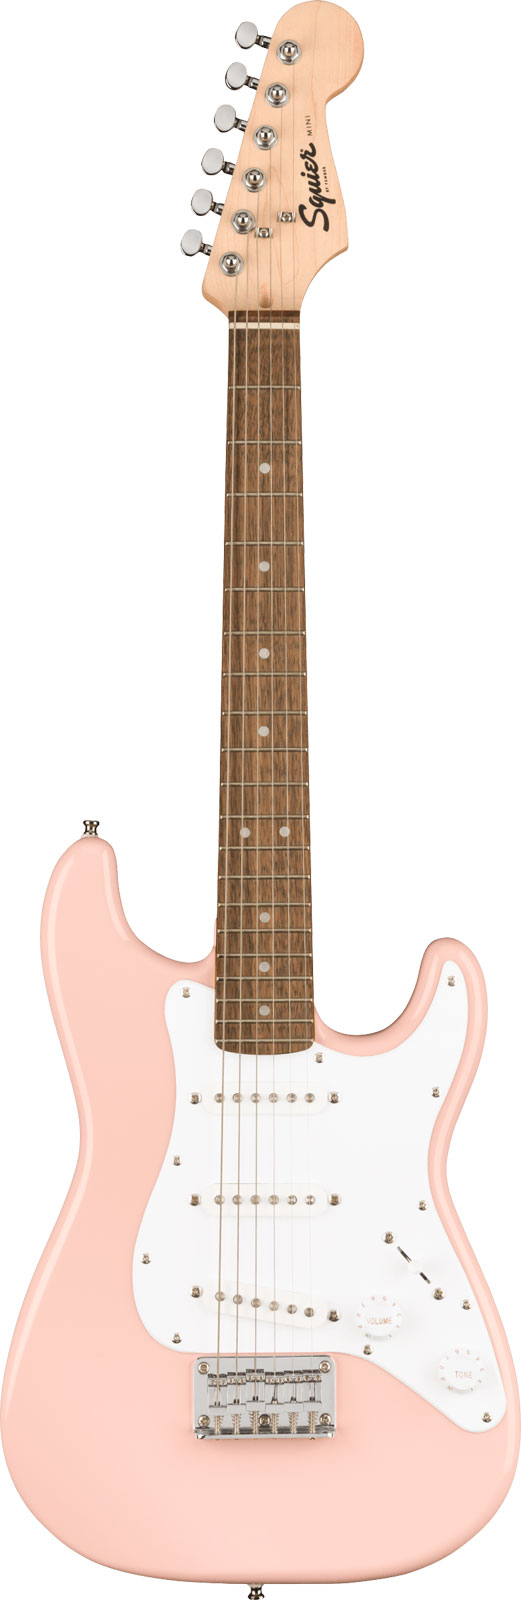 SQUIER STRATOCASTER MINI LRL SHELL PINK